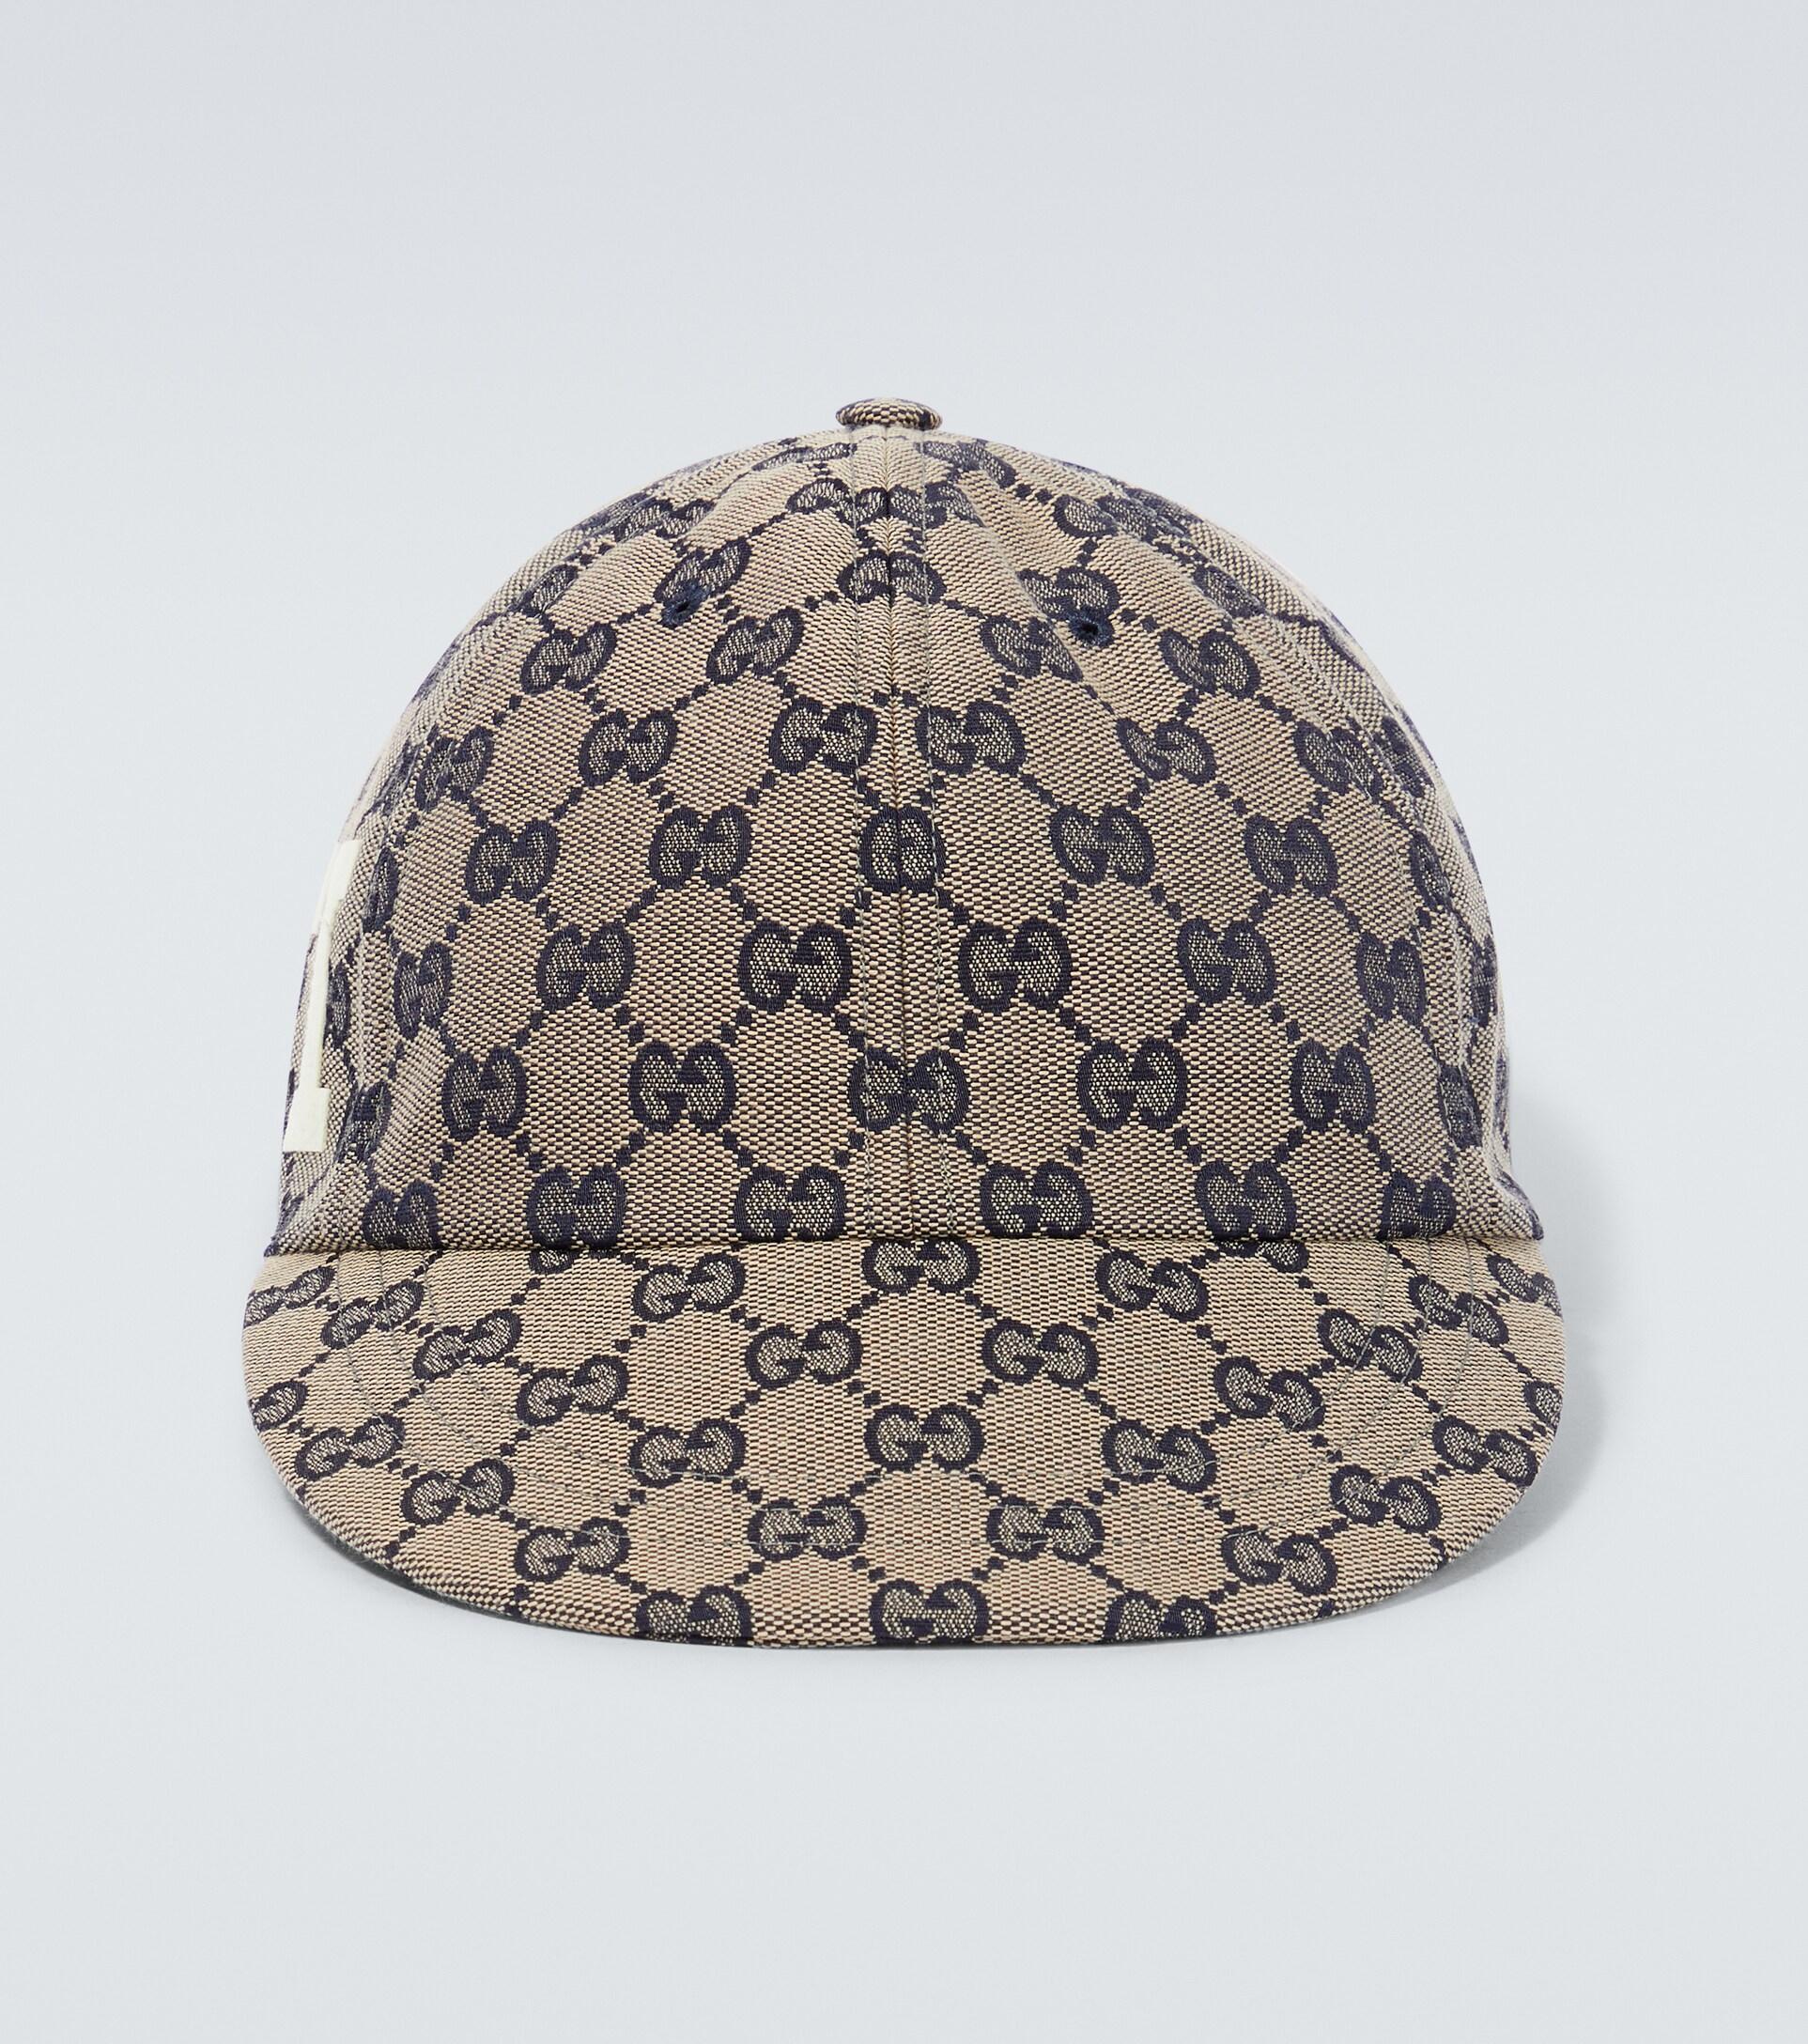 AUTHENTIC GUCCI HAT GG Canvas BIG SALE for Sale in The